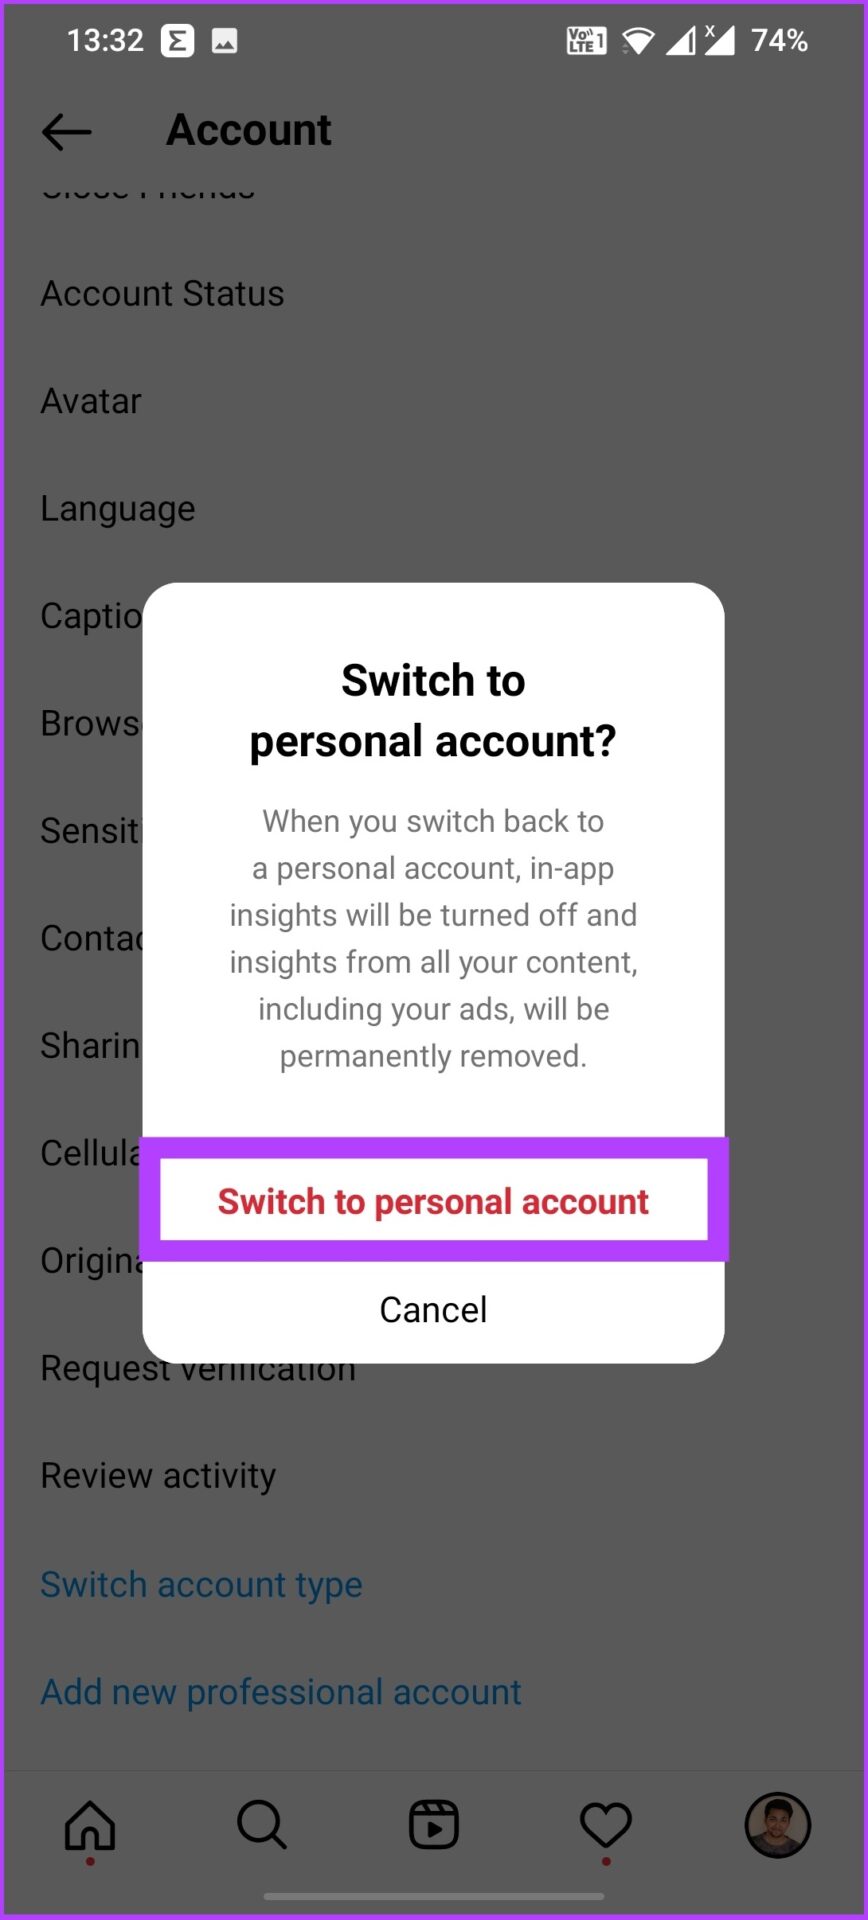 How to Turn off Business Account on Instagram - 6